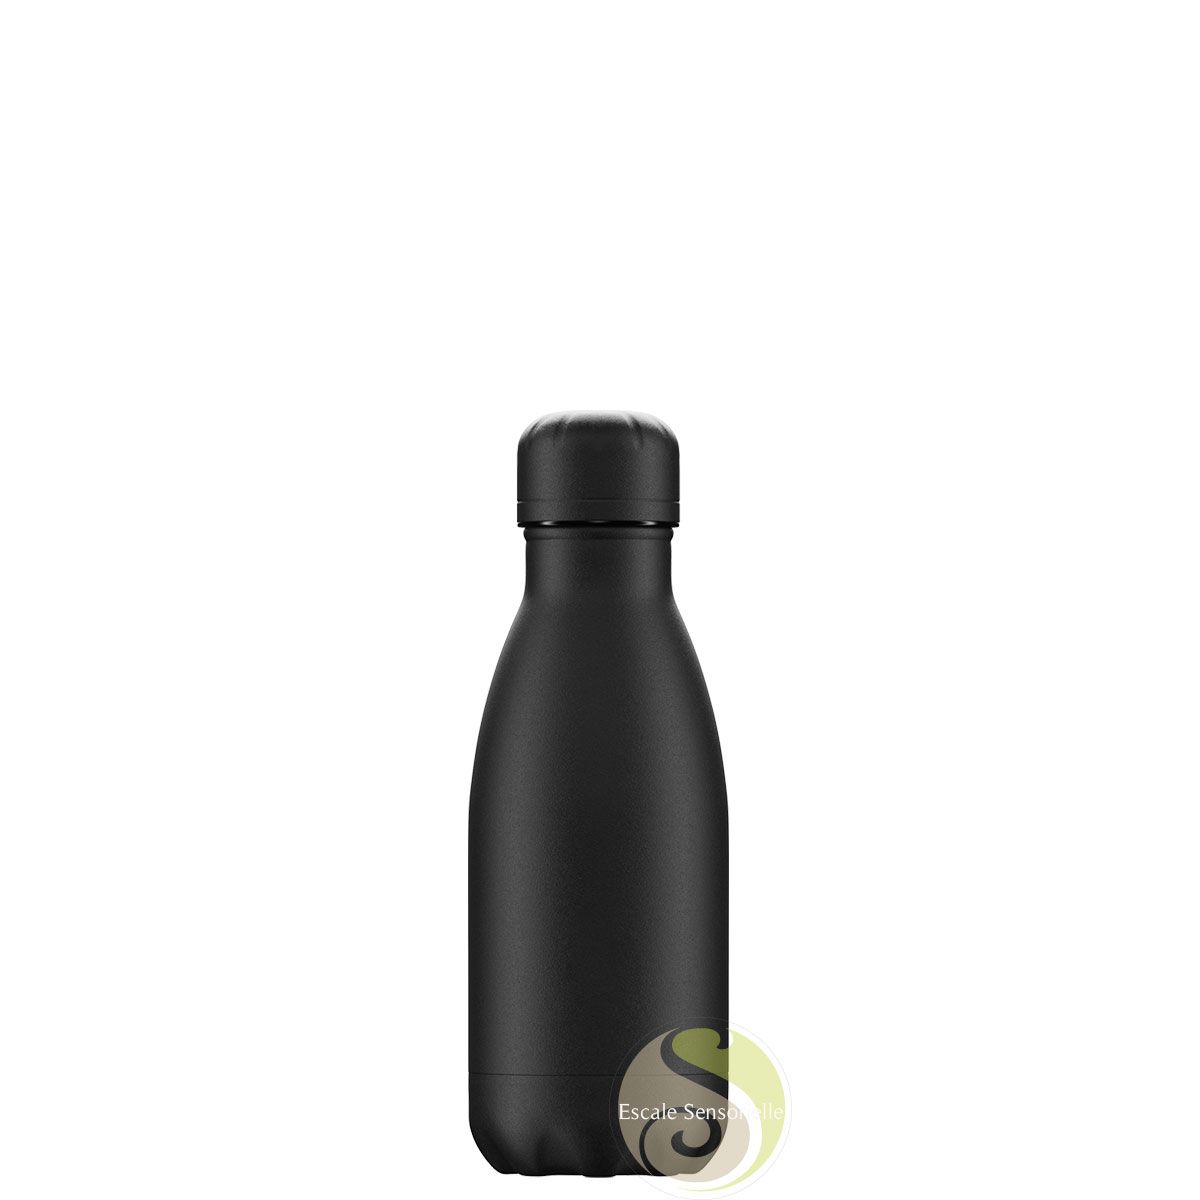 Petit thermos Chilly's bottle 260ml monochrome all black gourde isotherme  inox - Escale Sensorielle